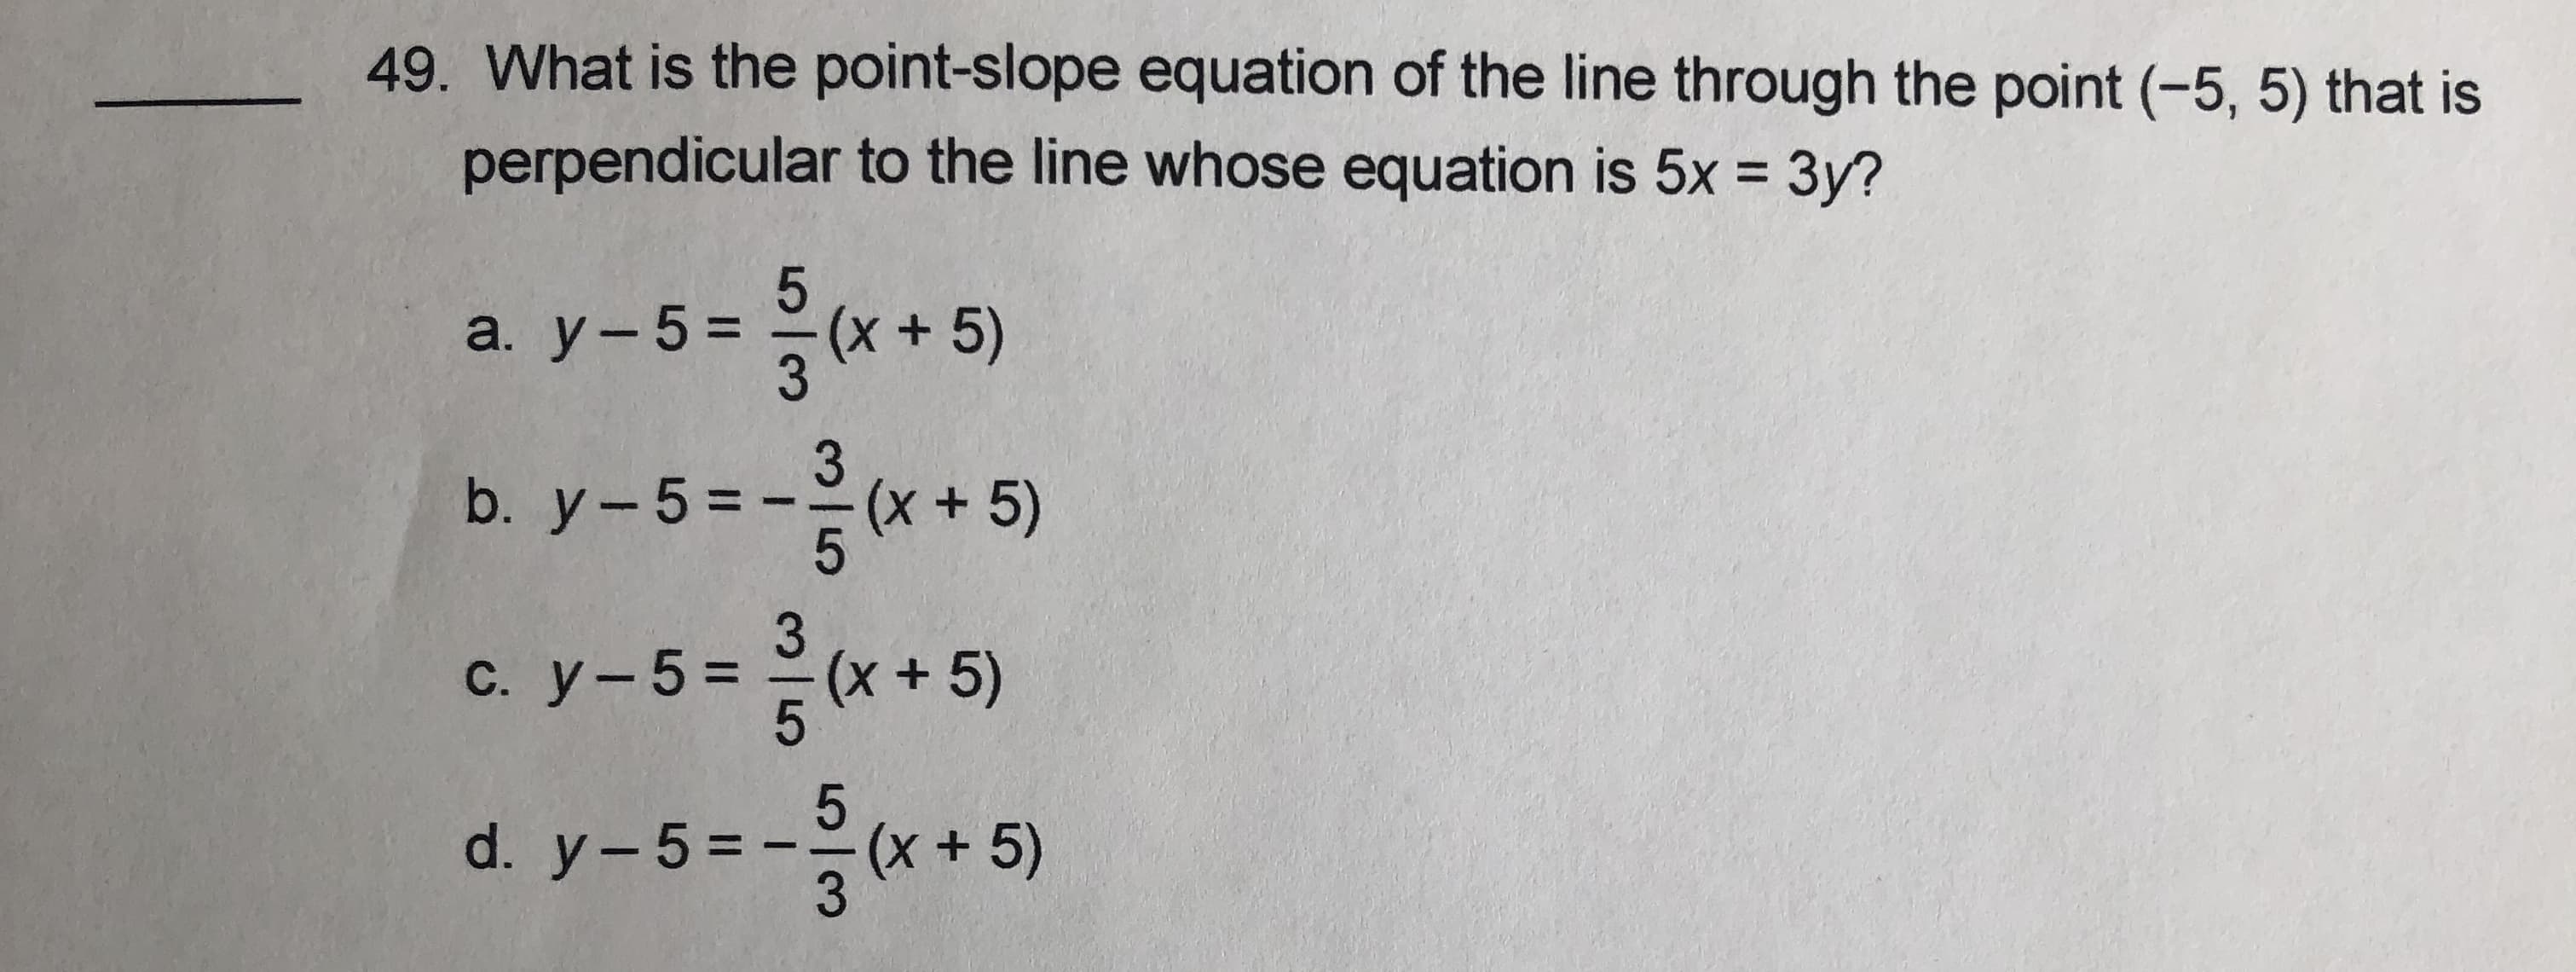 What is the point-slope equation of the line through the point (-5, 5) that is
perpendicular to the line whose equation is 5x = 3y?
